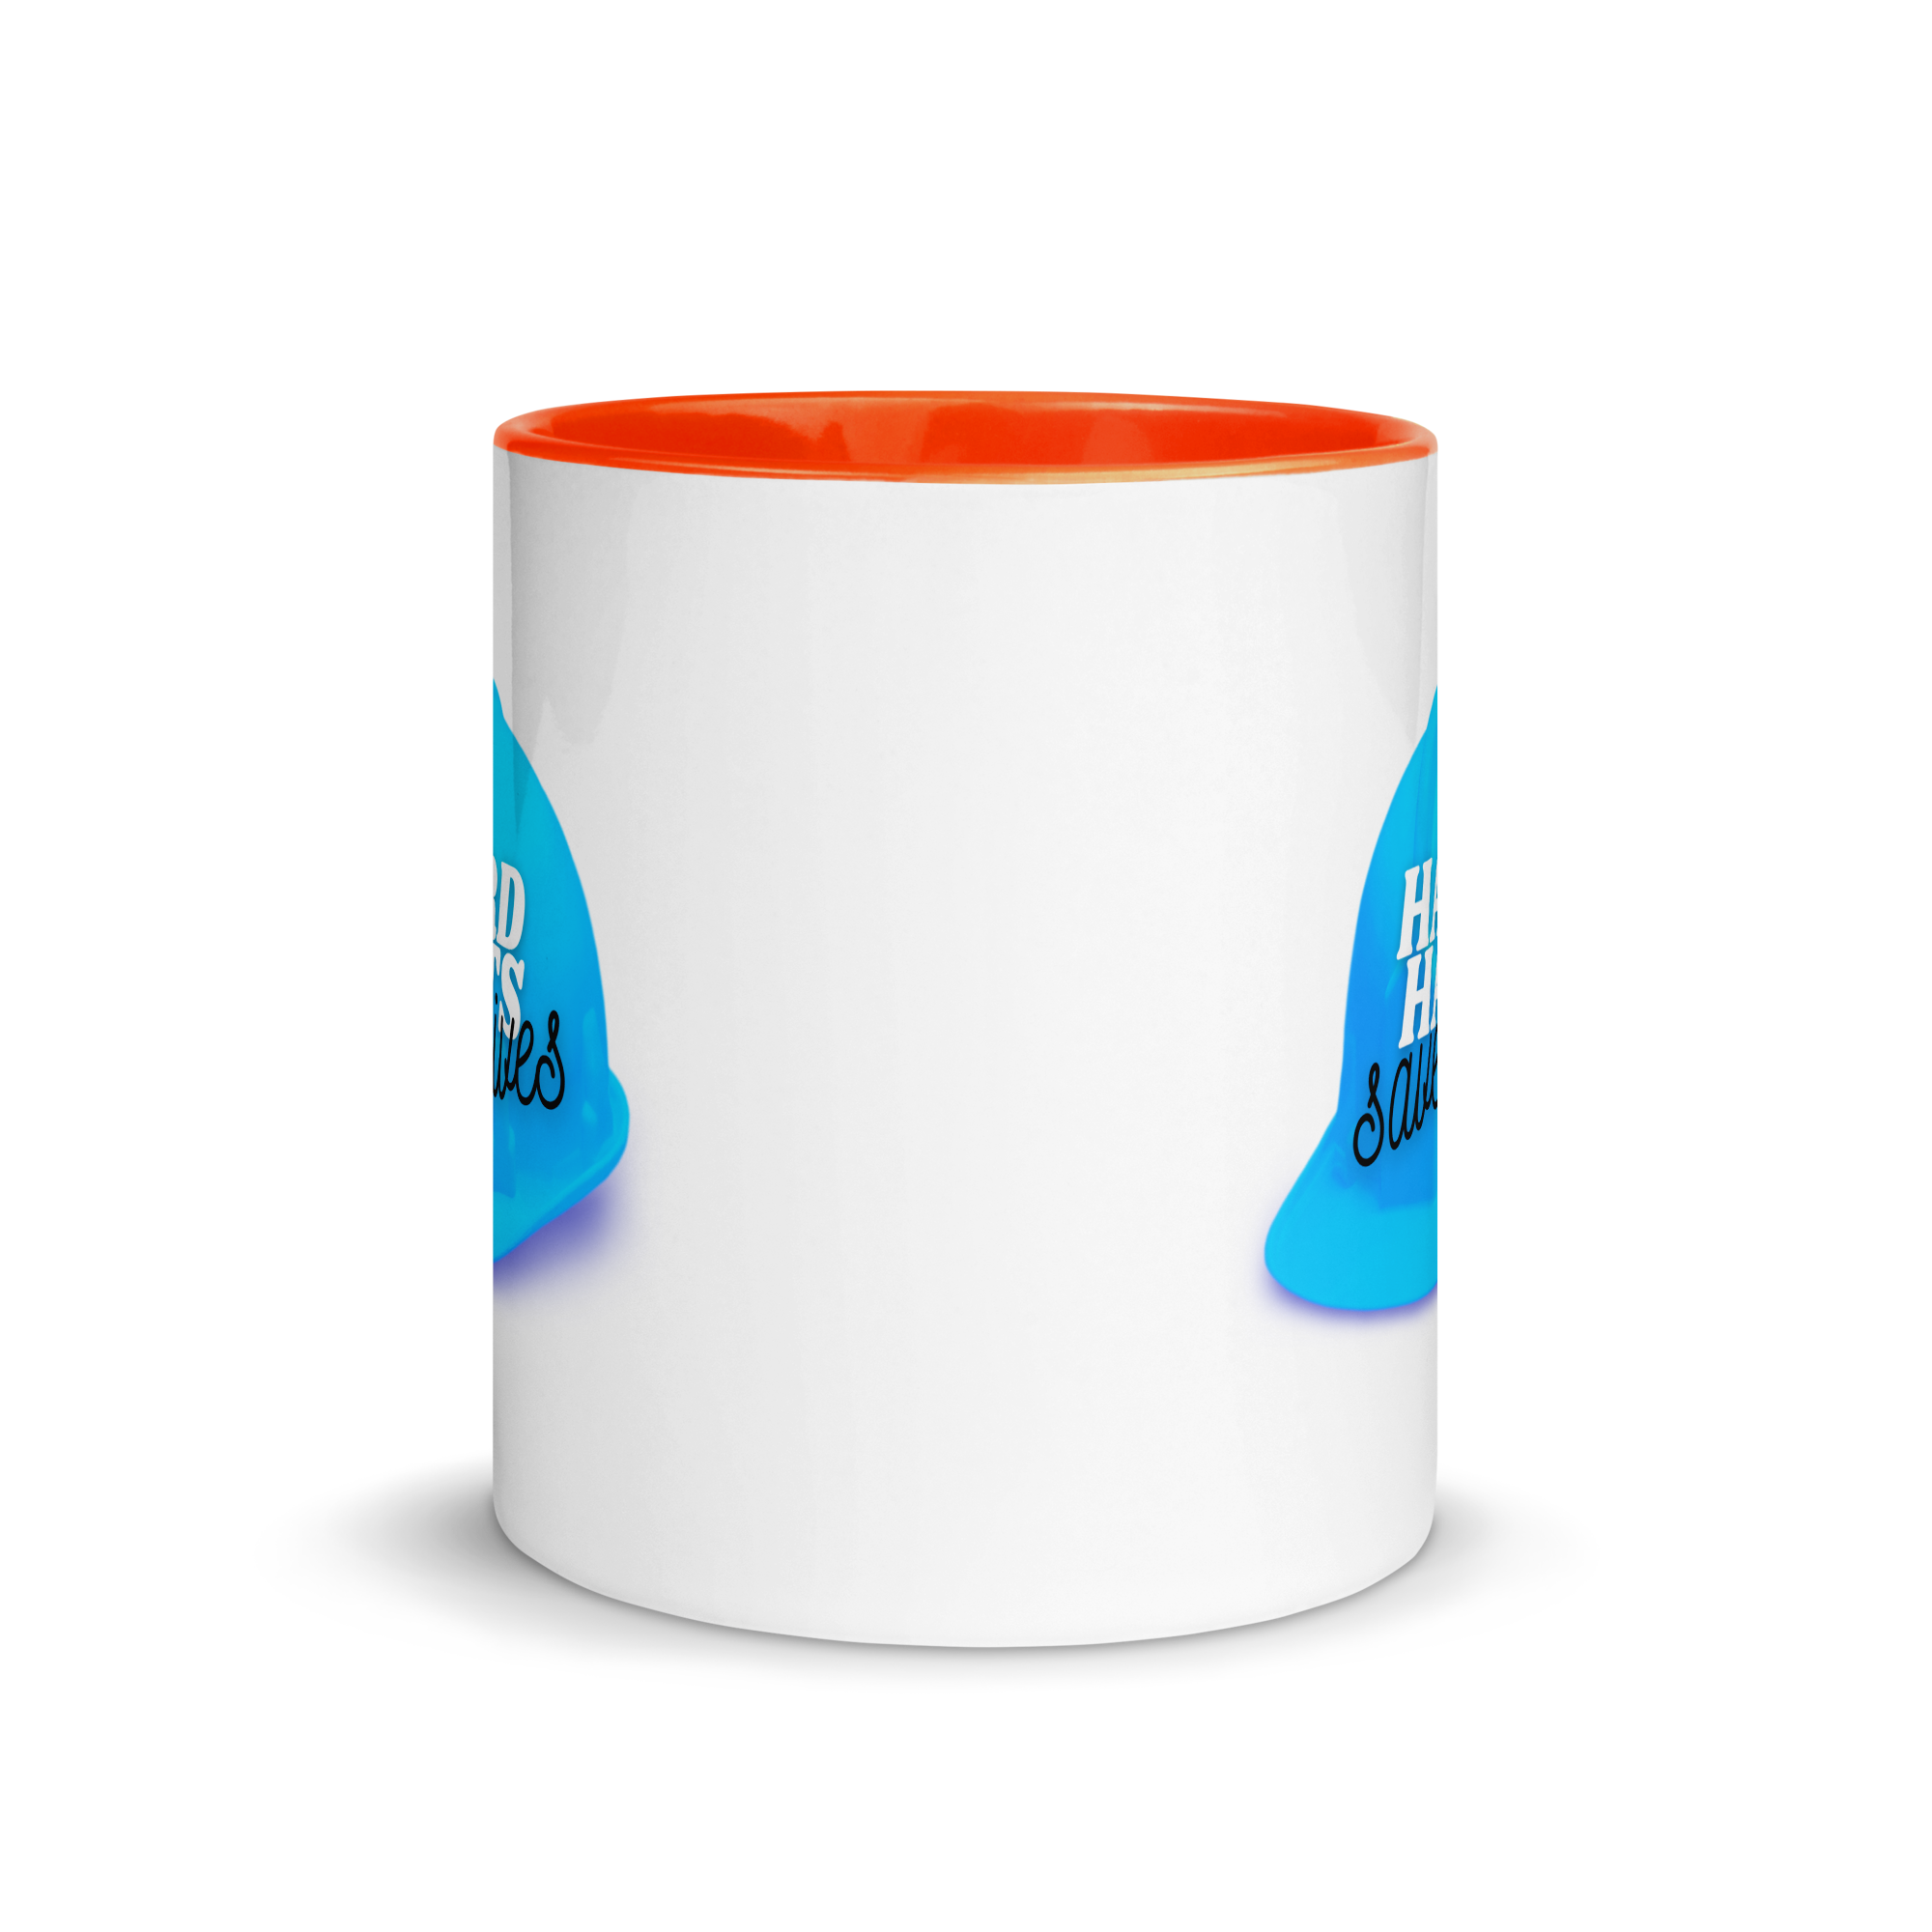 White ceramic mug with a blue hard hat with text that says "Hard hats save lives" with an orange rim, inside, and handle.